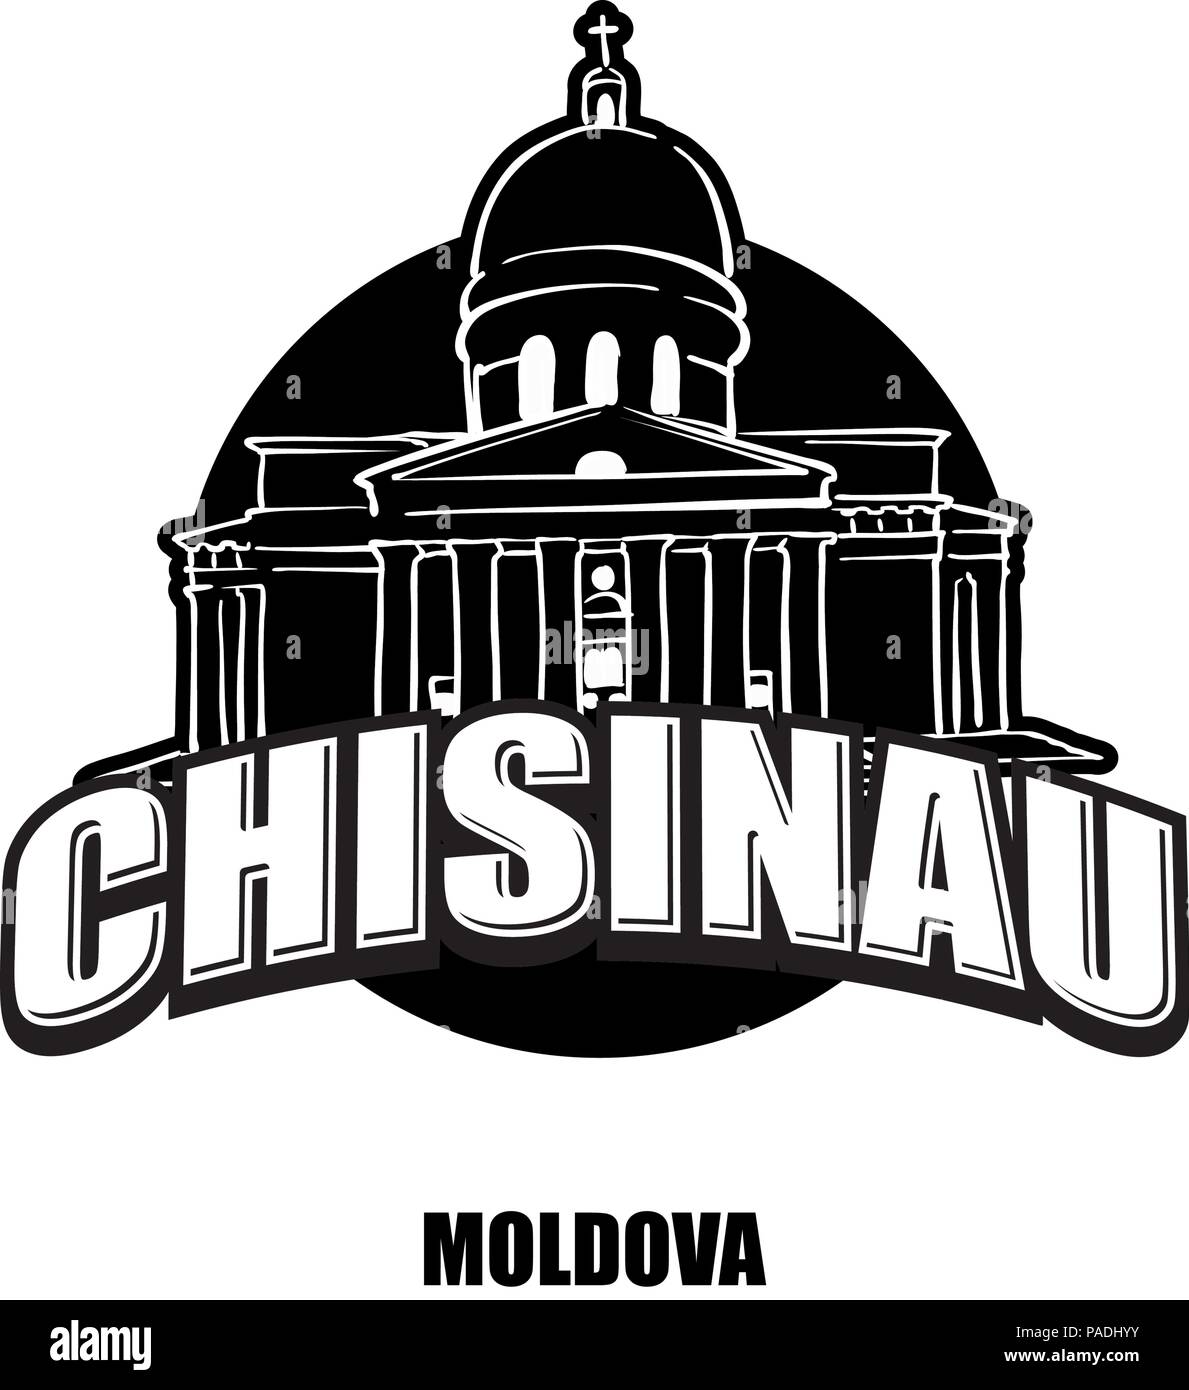 Chisinau, Moldova, black and white logo for high quality prints. Hand drawn vector sketch. Stock Vector